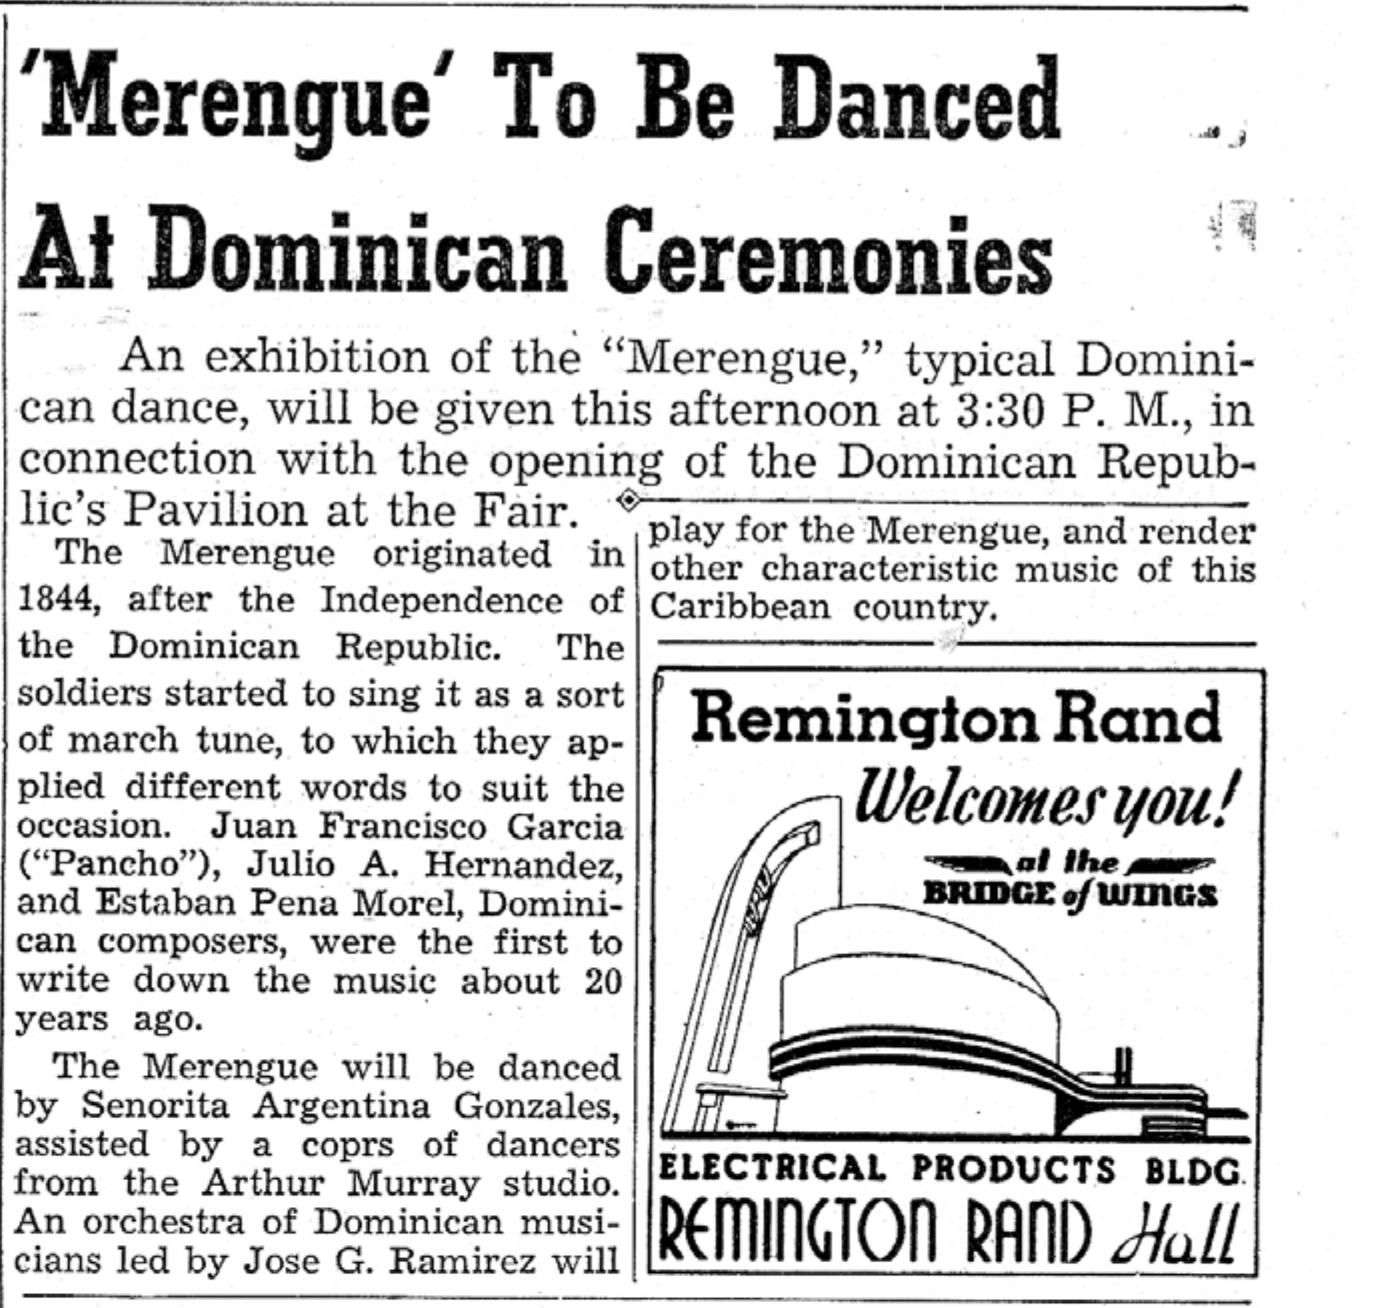 Announcement of Dominican Republic's Pavilion Opening, May 20, 1939